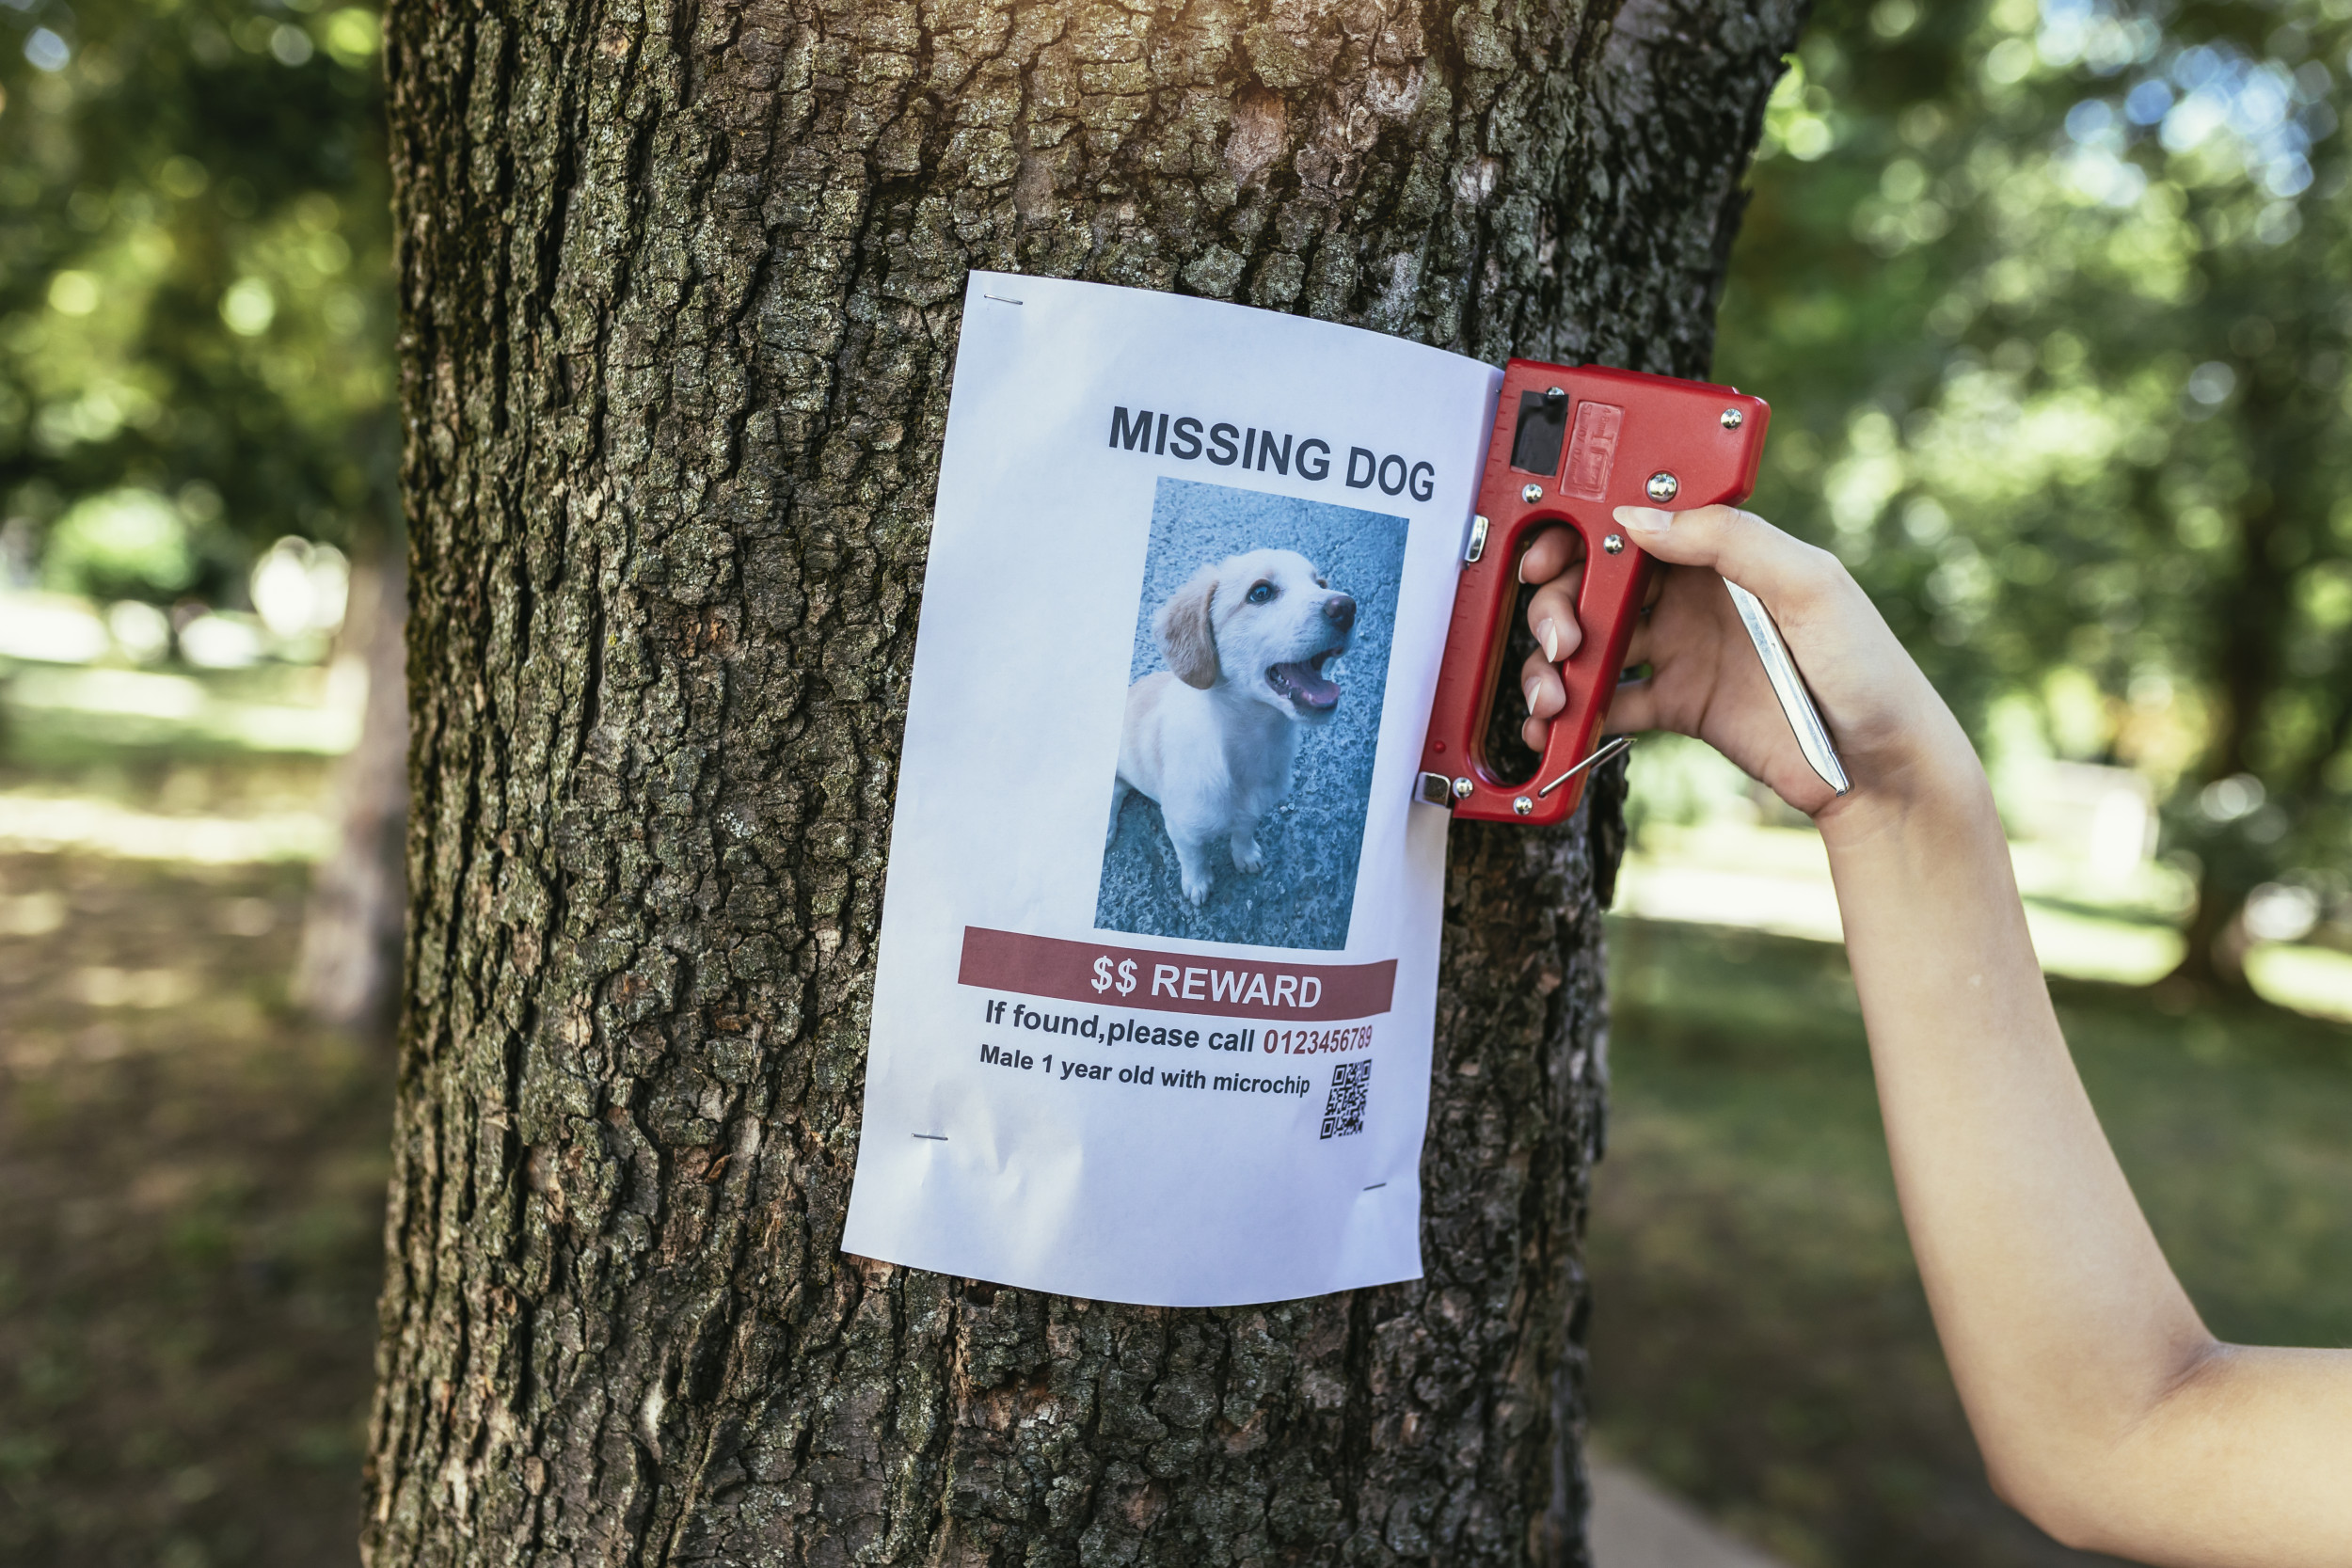 Florida Pet Owners Beware: New Scam Targets Animal Lovers